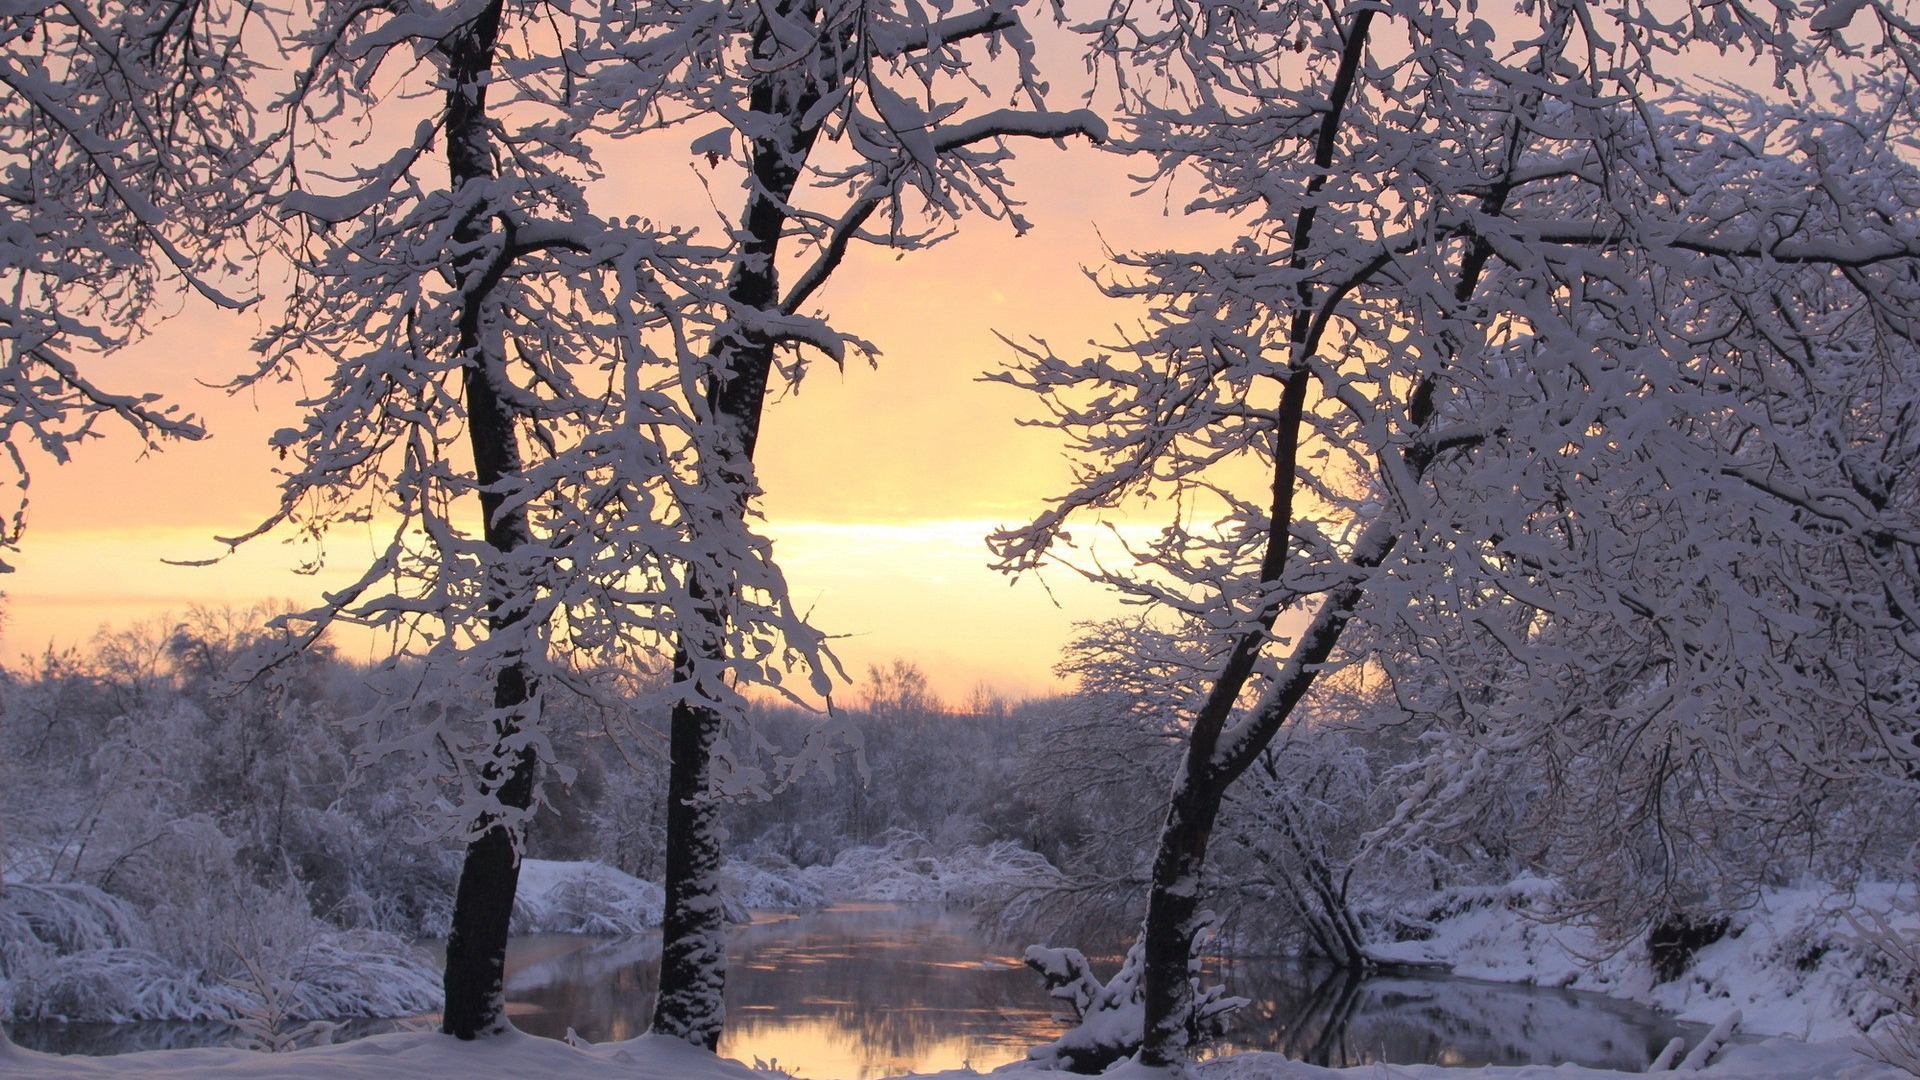 Snow-covered trees at the lake